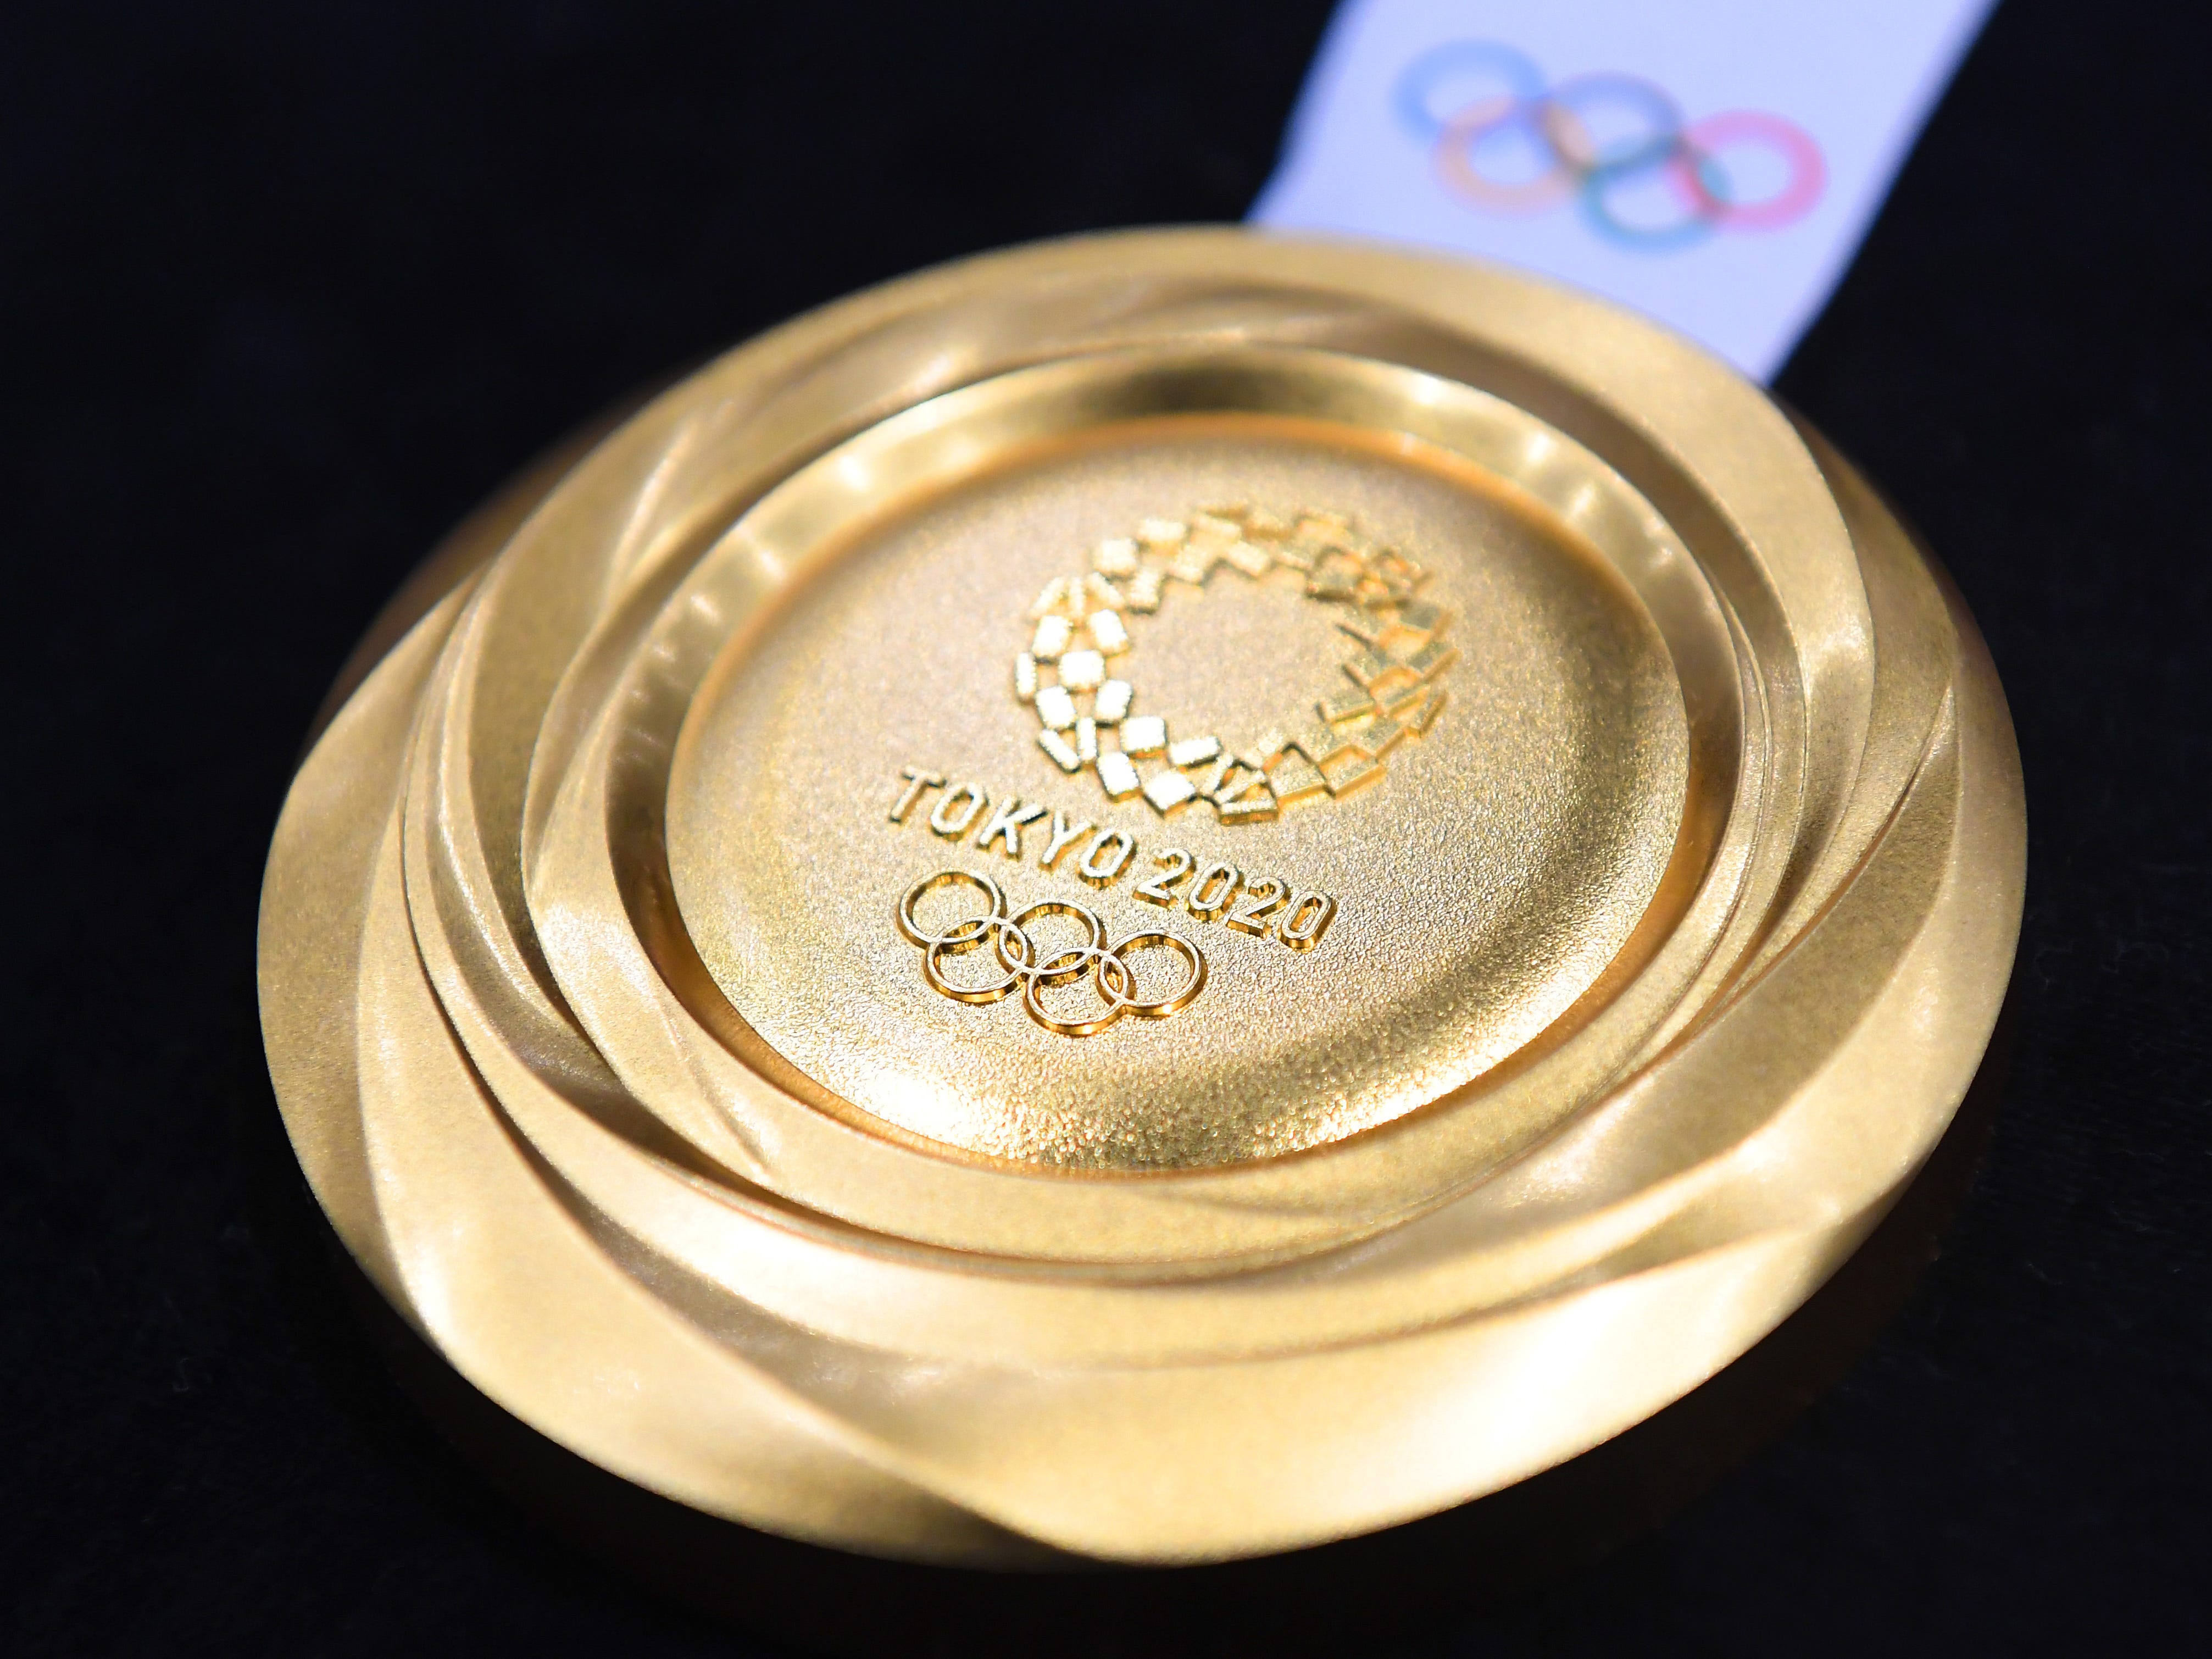 Another angle of the gold medal for the 2020 Summer Olympics.